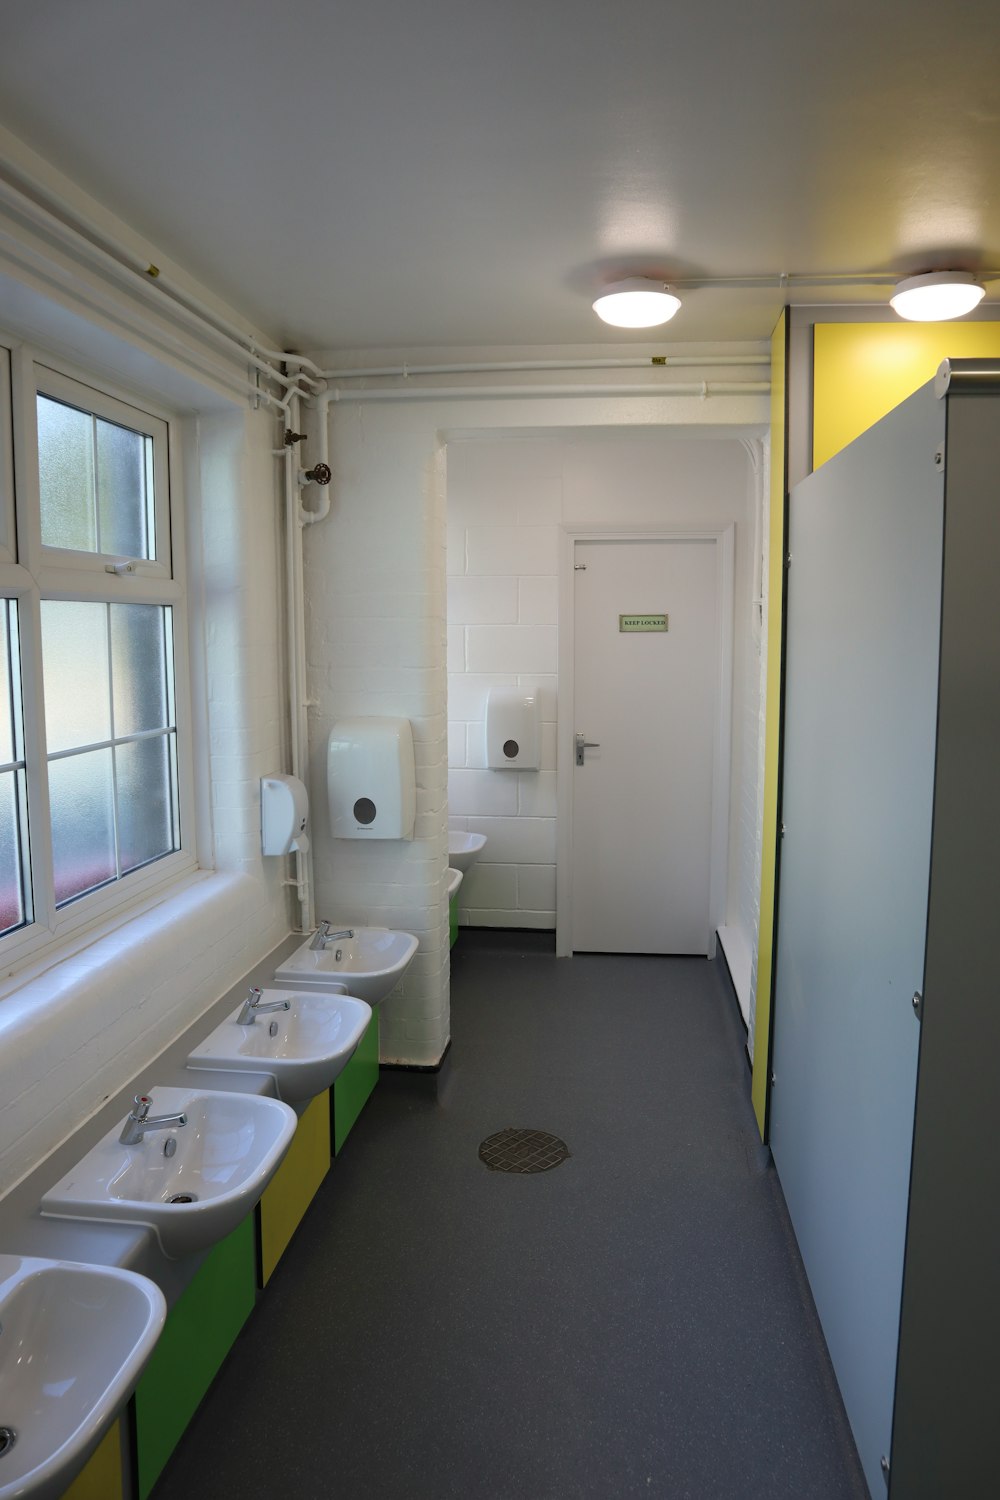 Are Your Students Avoiding Using the Toilets? - OrcaSpaces